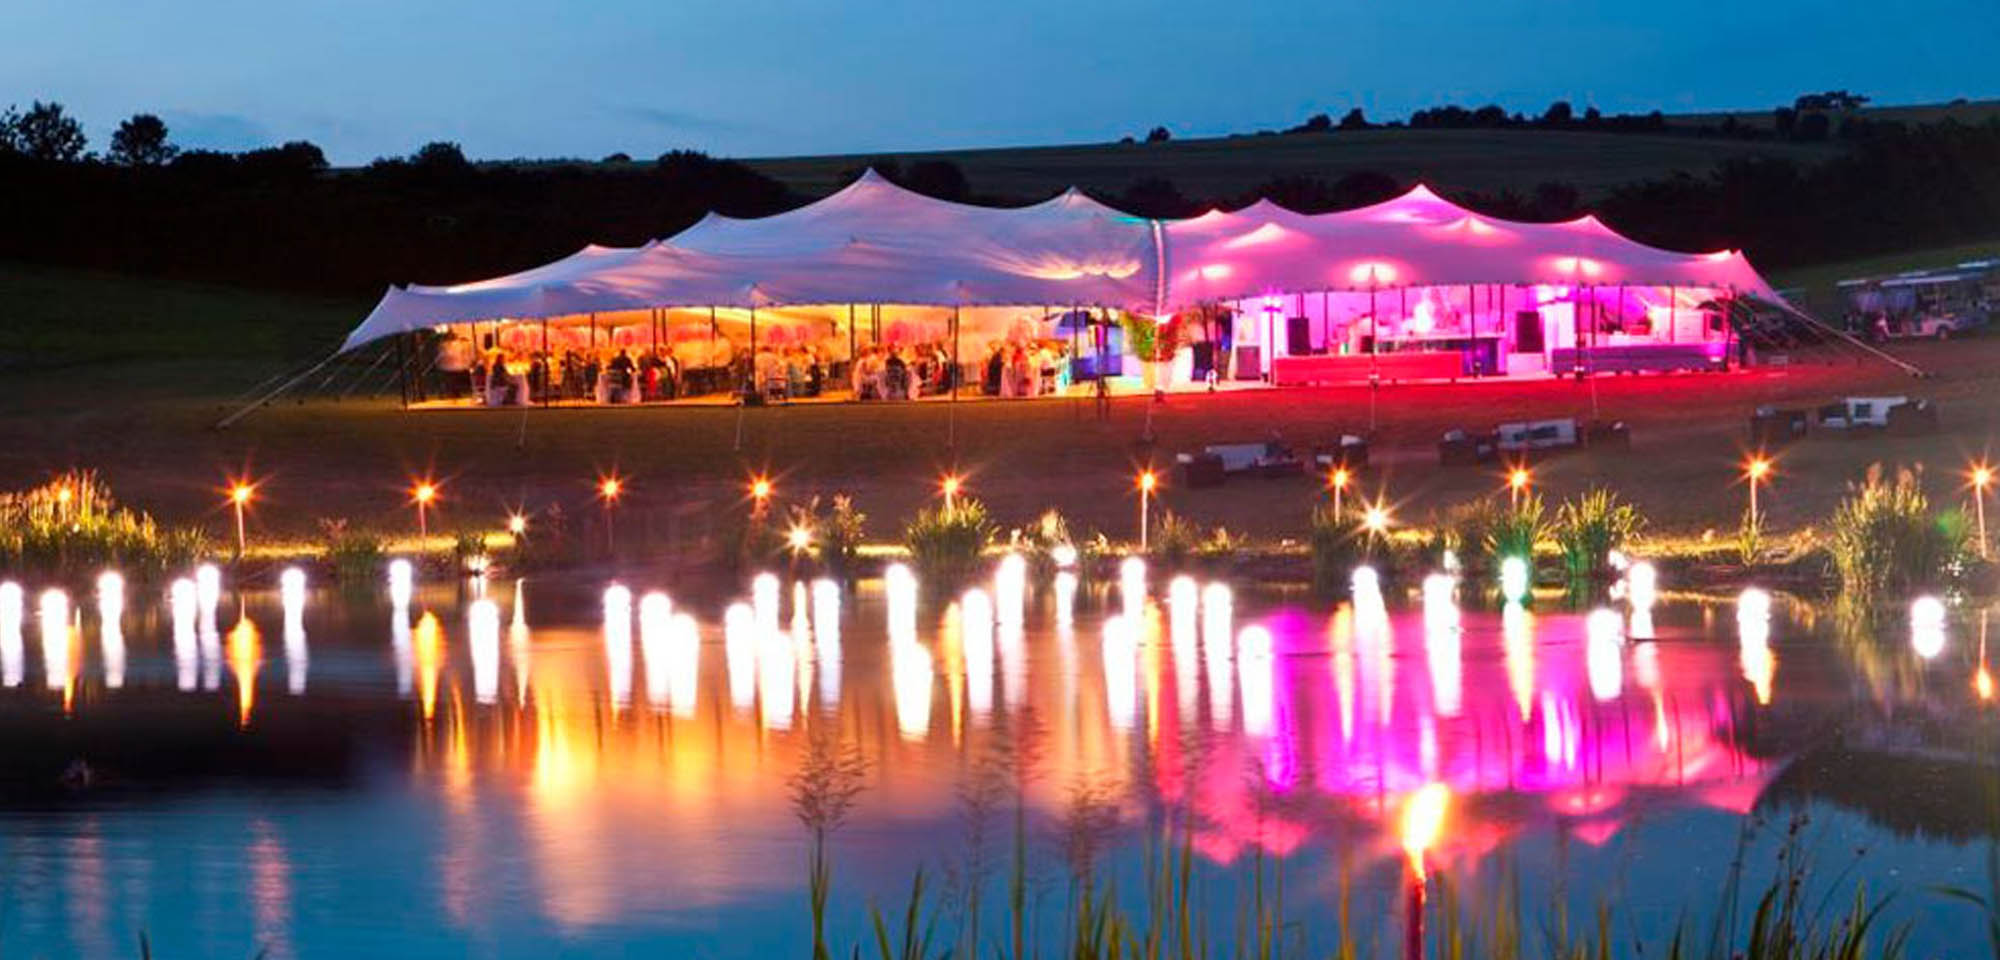 Stretch Tents at night by a lake lit up in colour LED lights